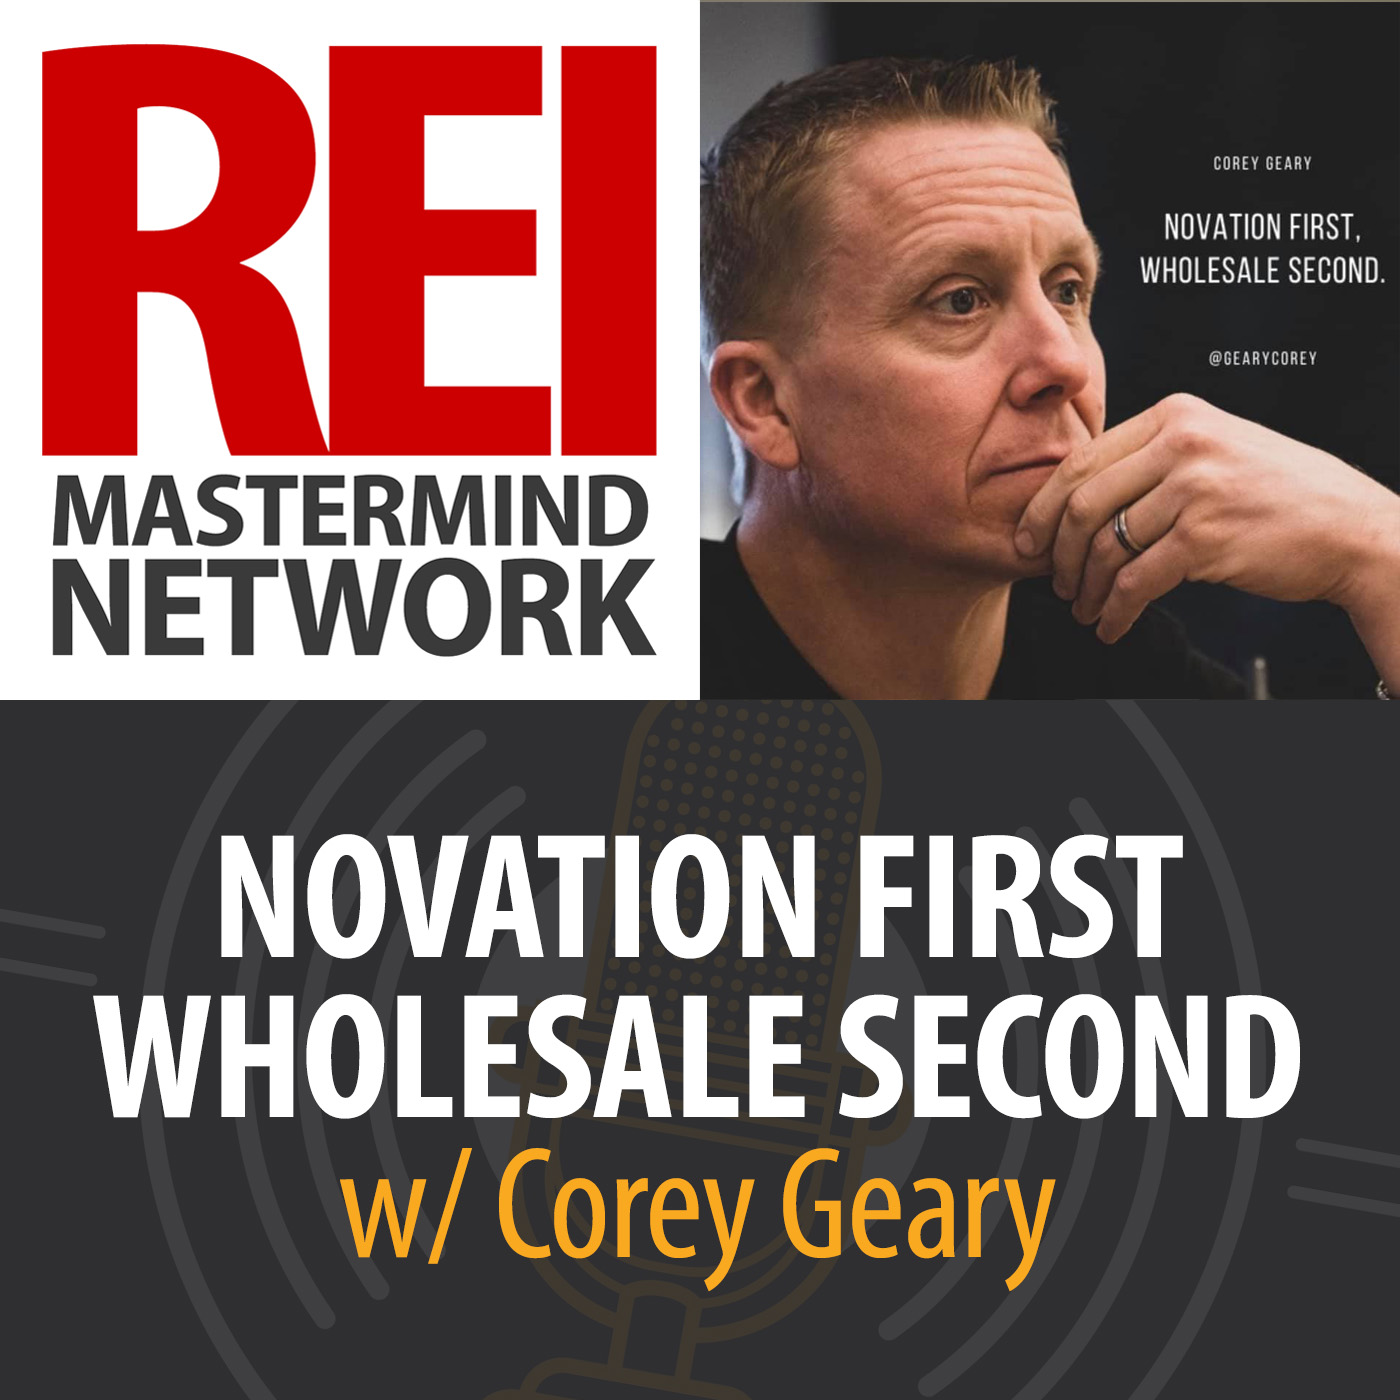 Novation First Wholesale Second with Corey Geary